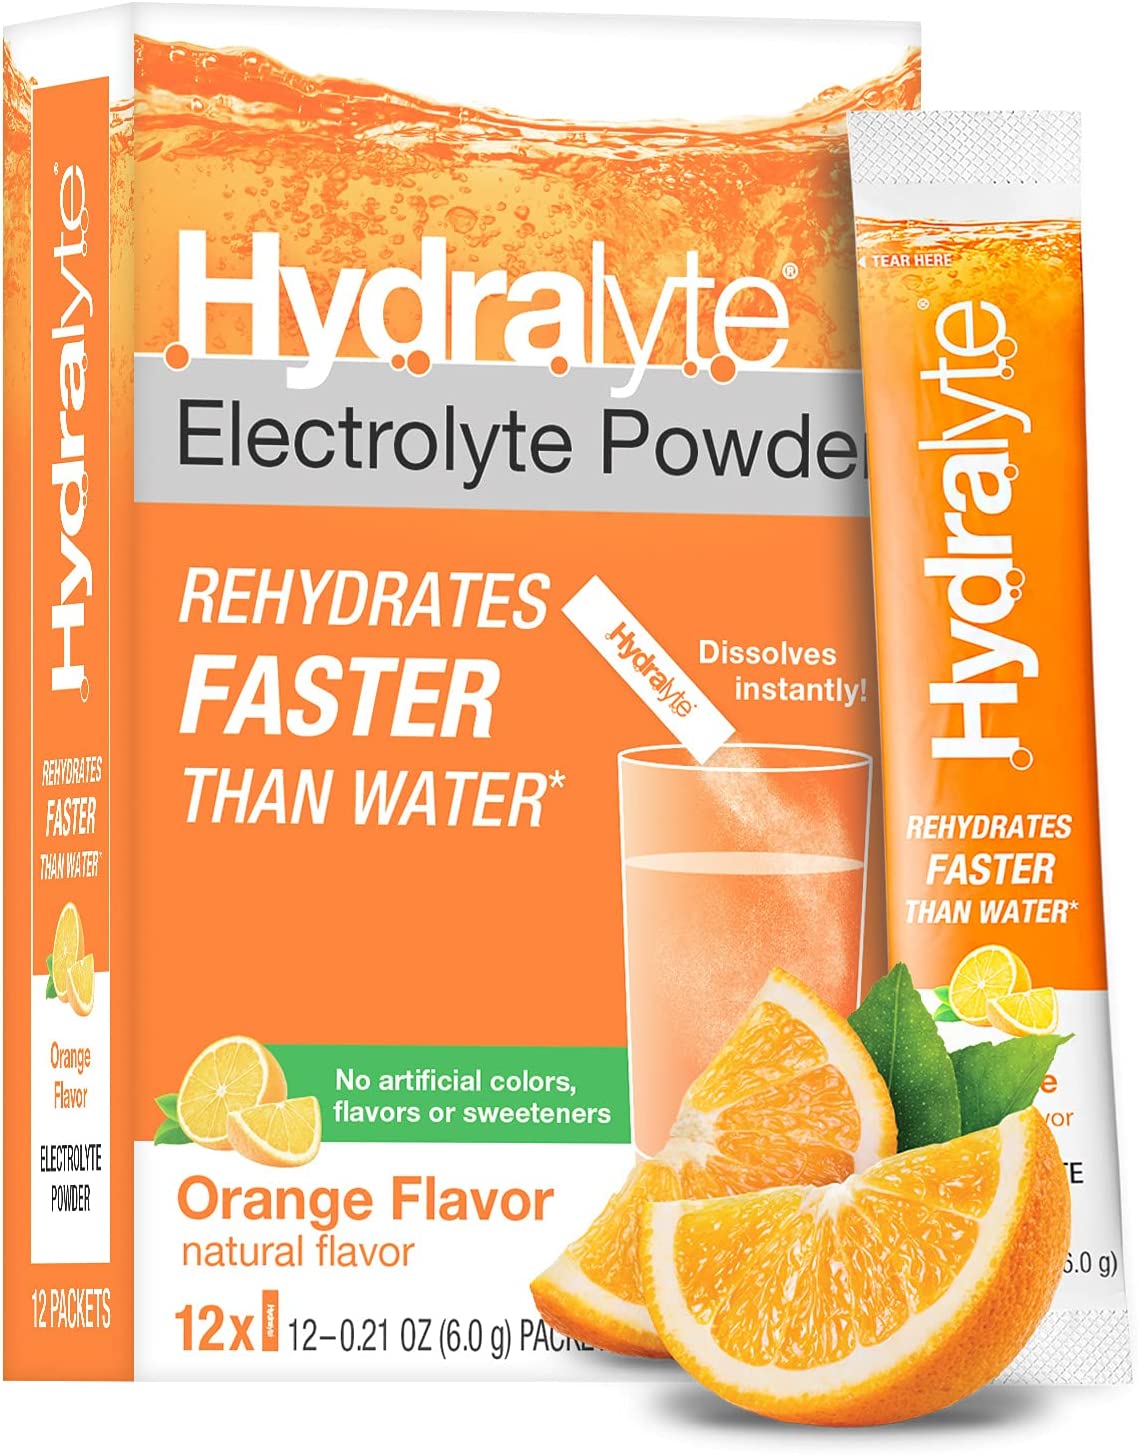 Hydralyte Low Sugar Rapid Rehydration – Lightly Sparkling Electrolyte Powder Packets, 8 oz Serve | Orange Hydration Packets | Hydration for Heat, Travel, Exercise and Bachelorette Parties (12 Count)